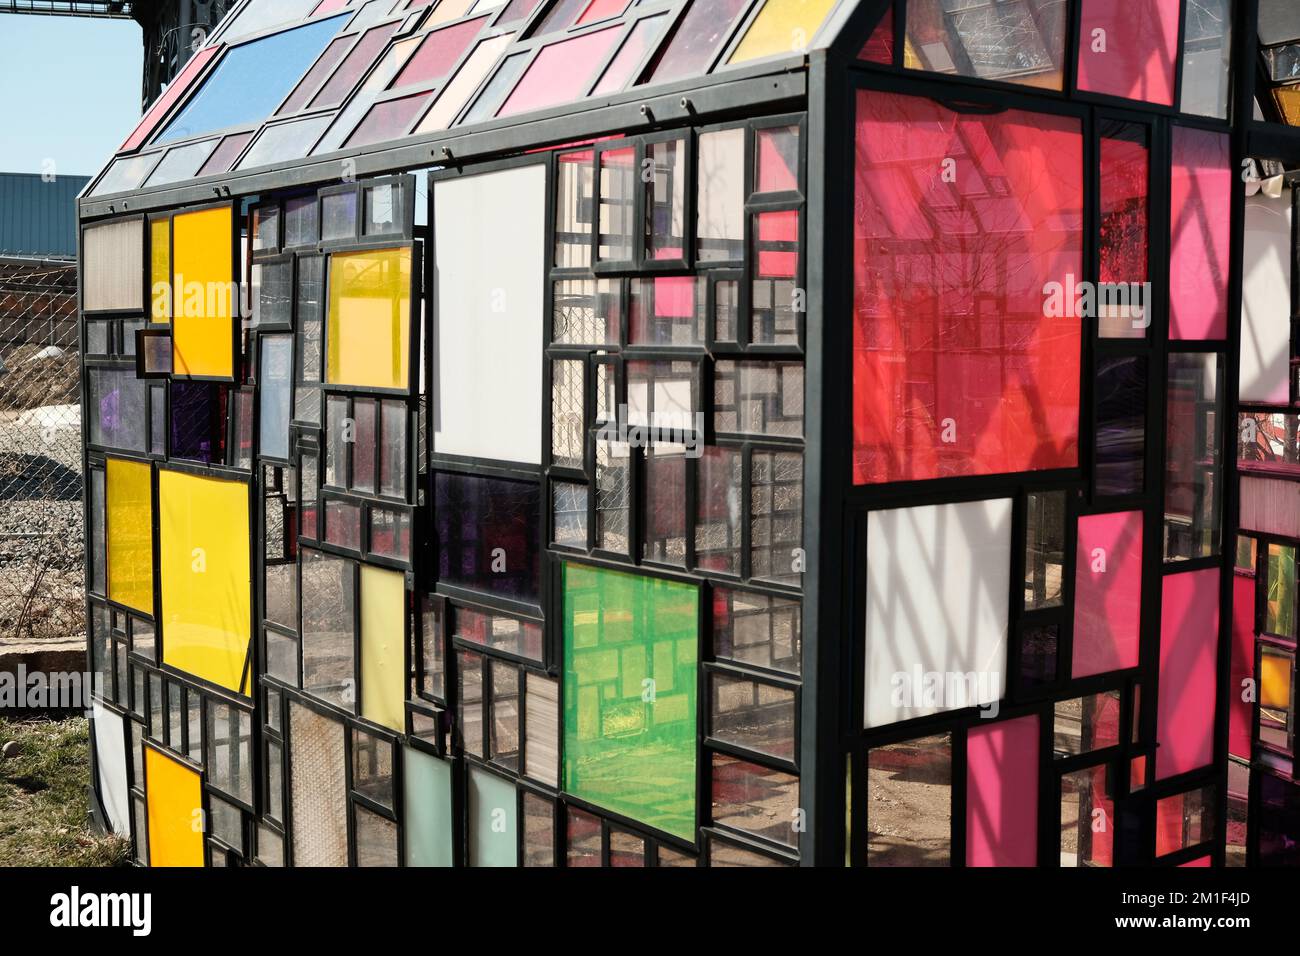 NEW YORK, NY - March 18, 2018: Tom Fruins, Kolonihavehus, famous stained glass house in Brooklyn Bridge Park, NYC. Stock Photo